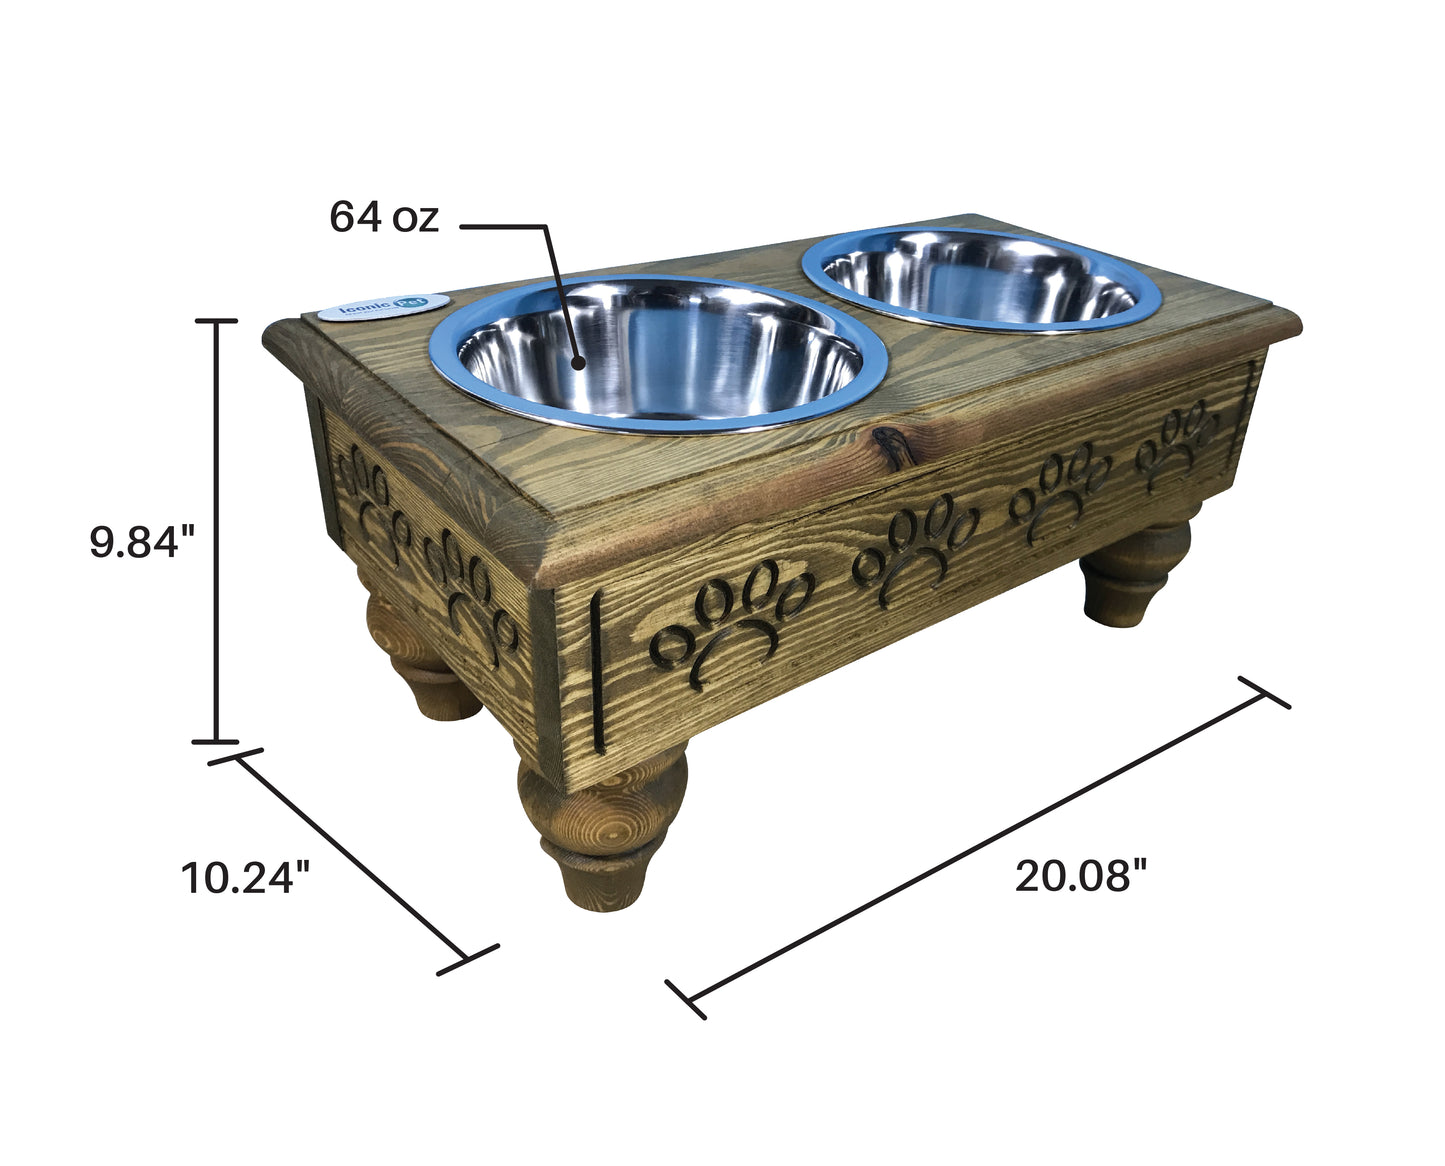 Sassy Paws Raised Wooden Pet Double Diner with Stainless Steel Bowls